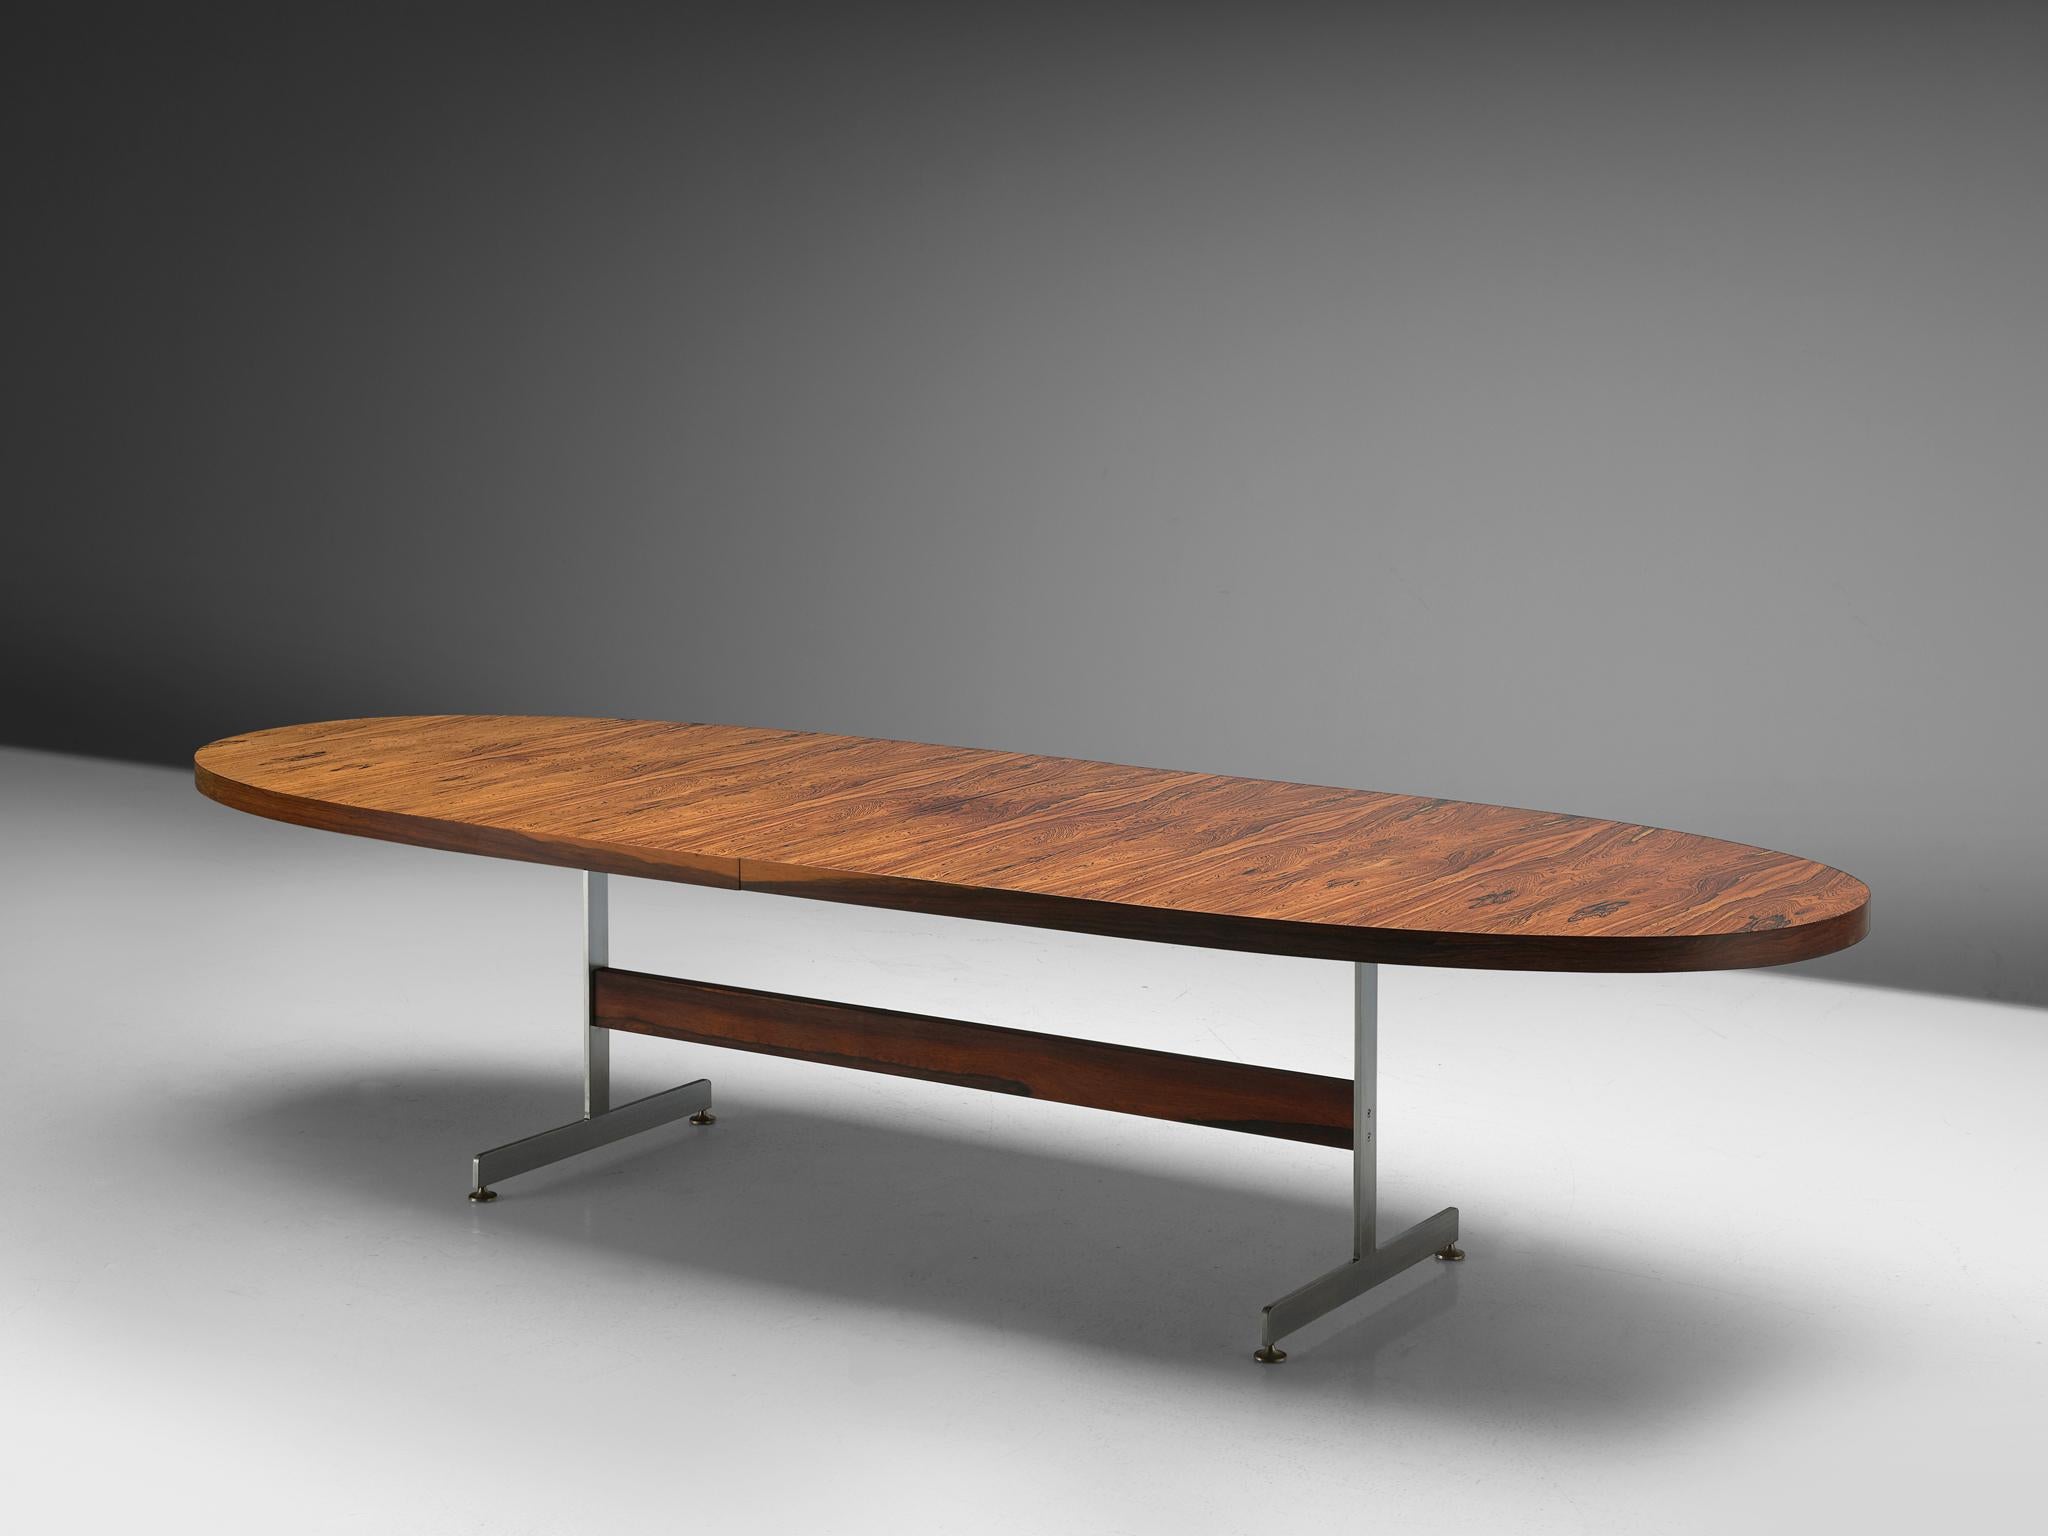 Robert Heritage for Archie Shine, conference table, rosewood and metal, United Kingdom, 1960s

A large oval rosewood table designed by Robert Heritage in the 1960s. The top is supported by metal chromed legs and with a wooden cross stretcher. It's